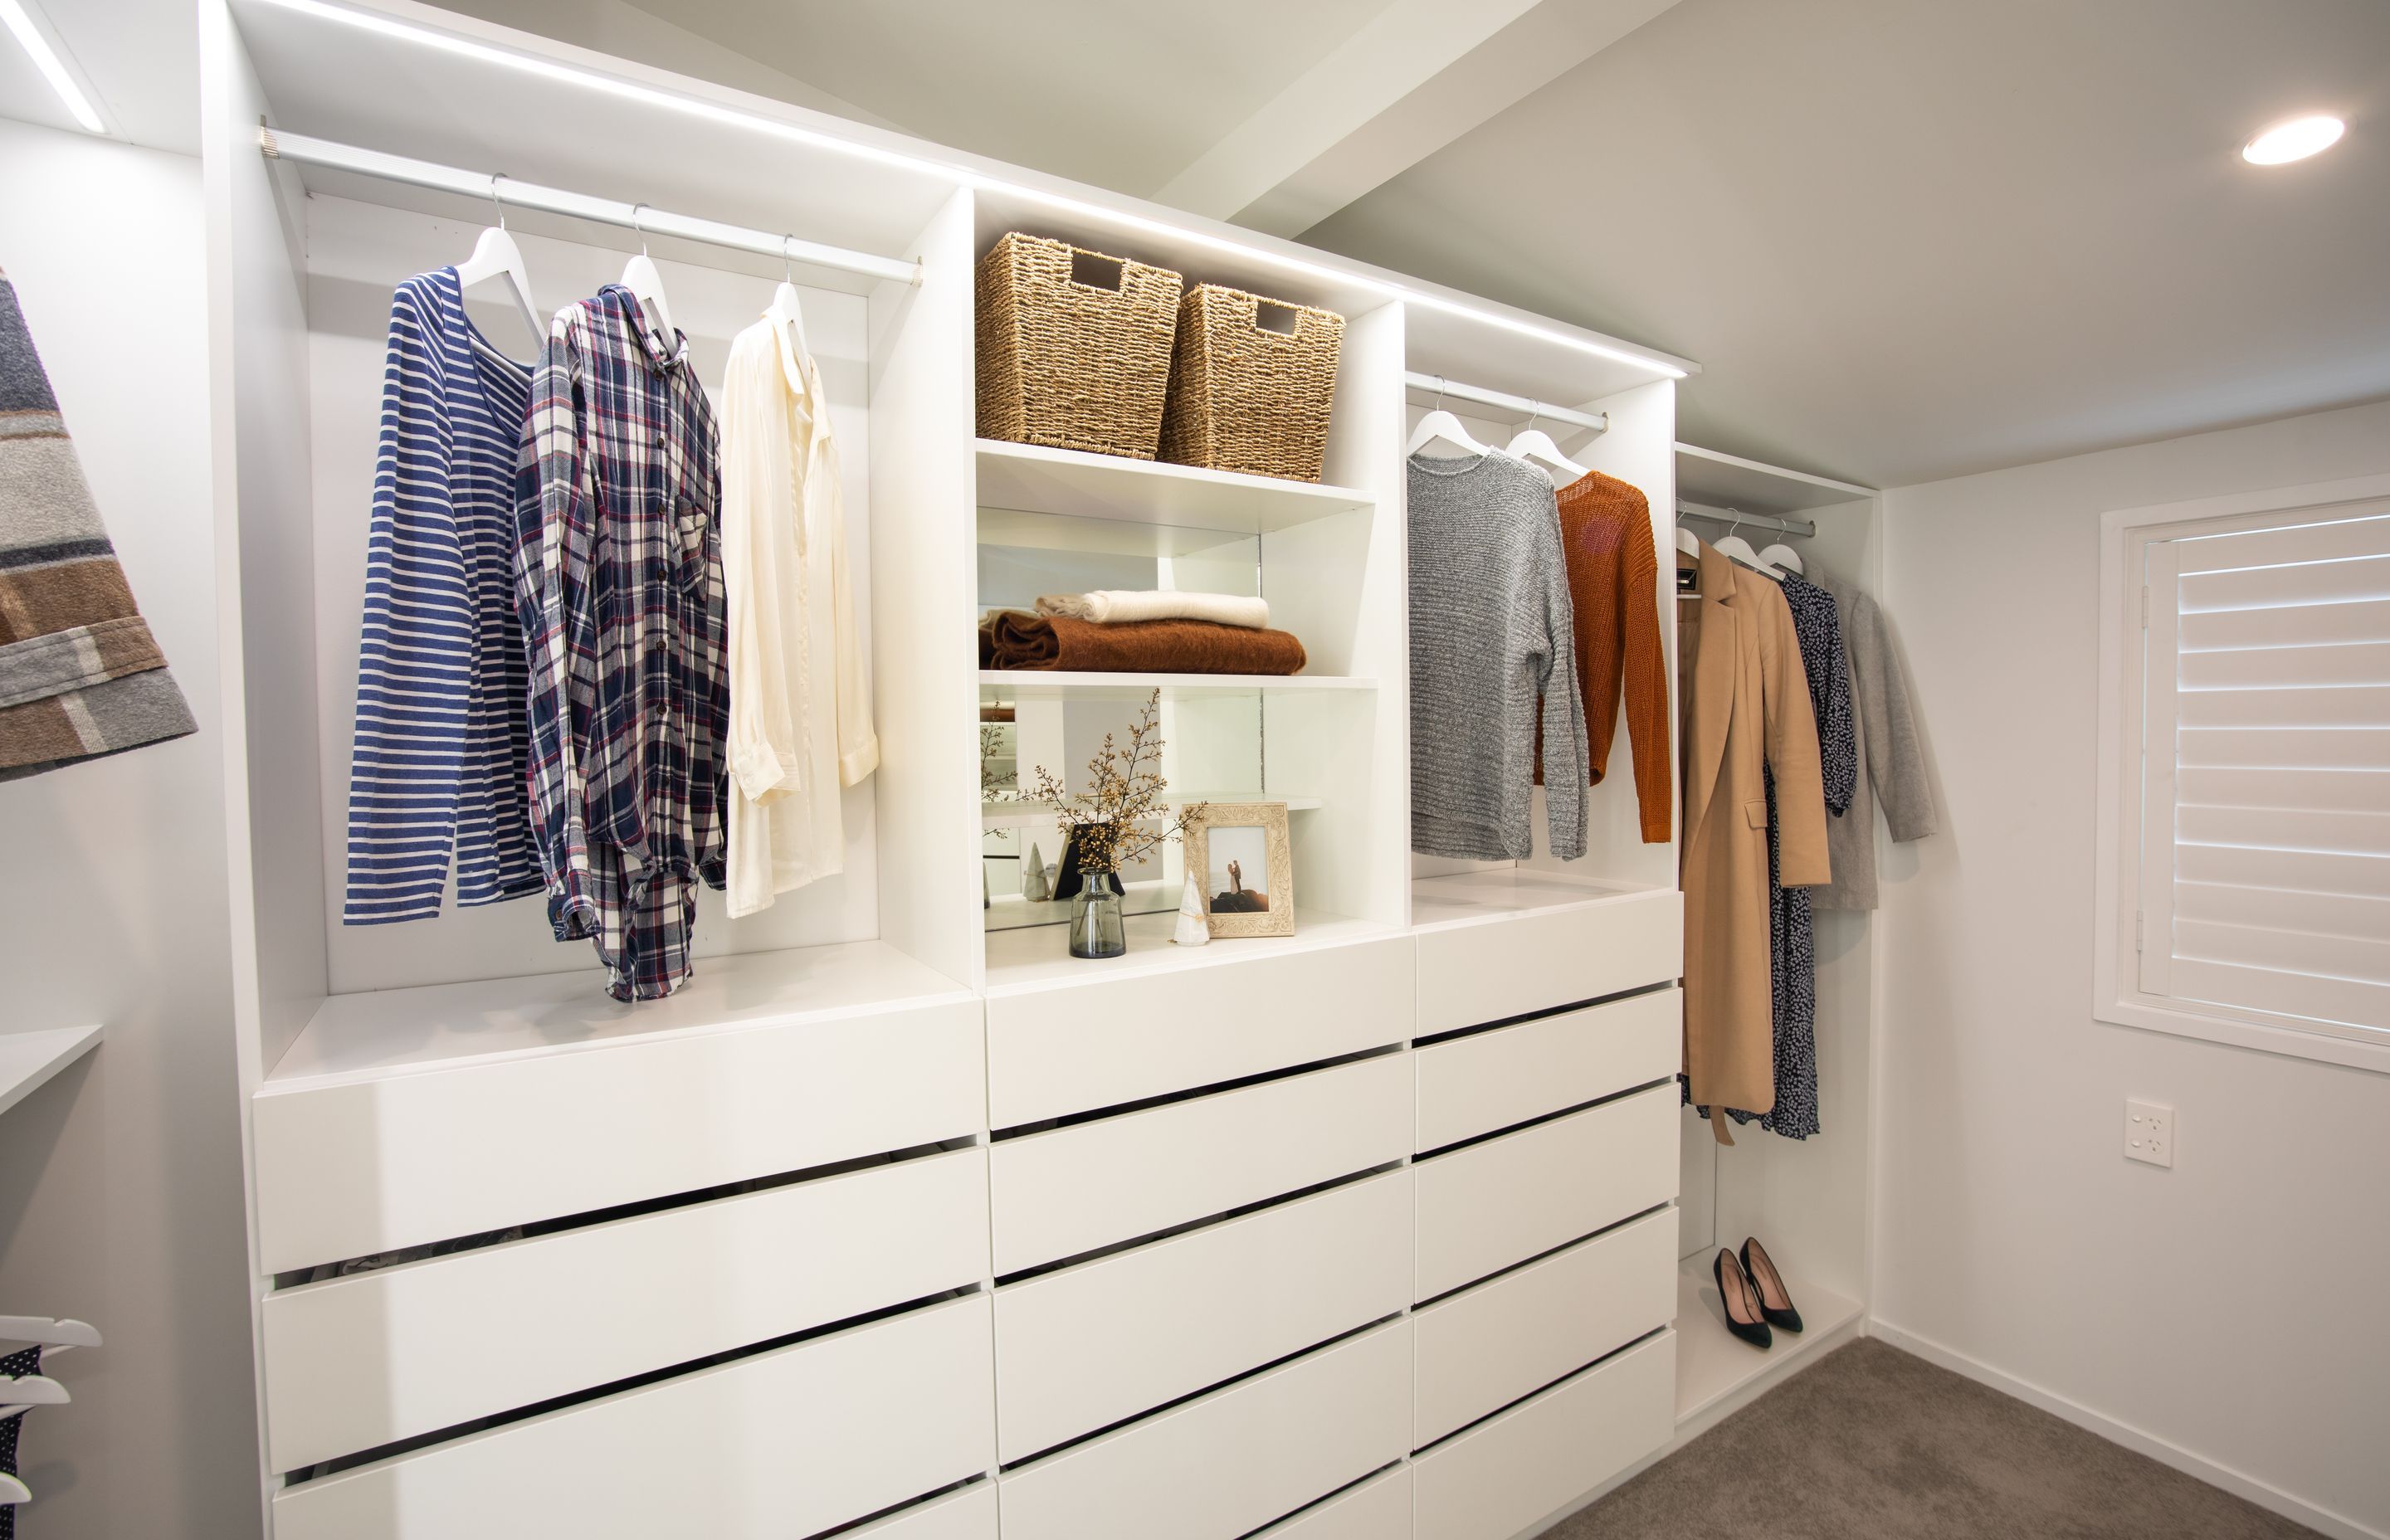 Storage that's stylish, luxurious and a pleasure to use